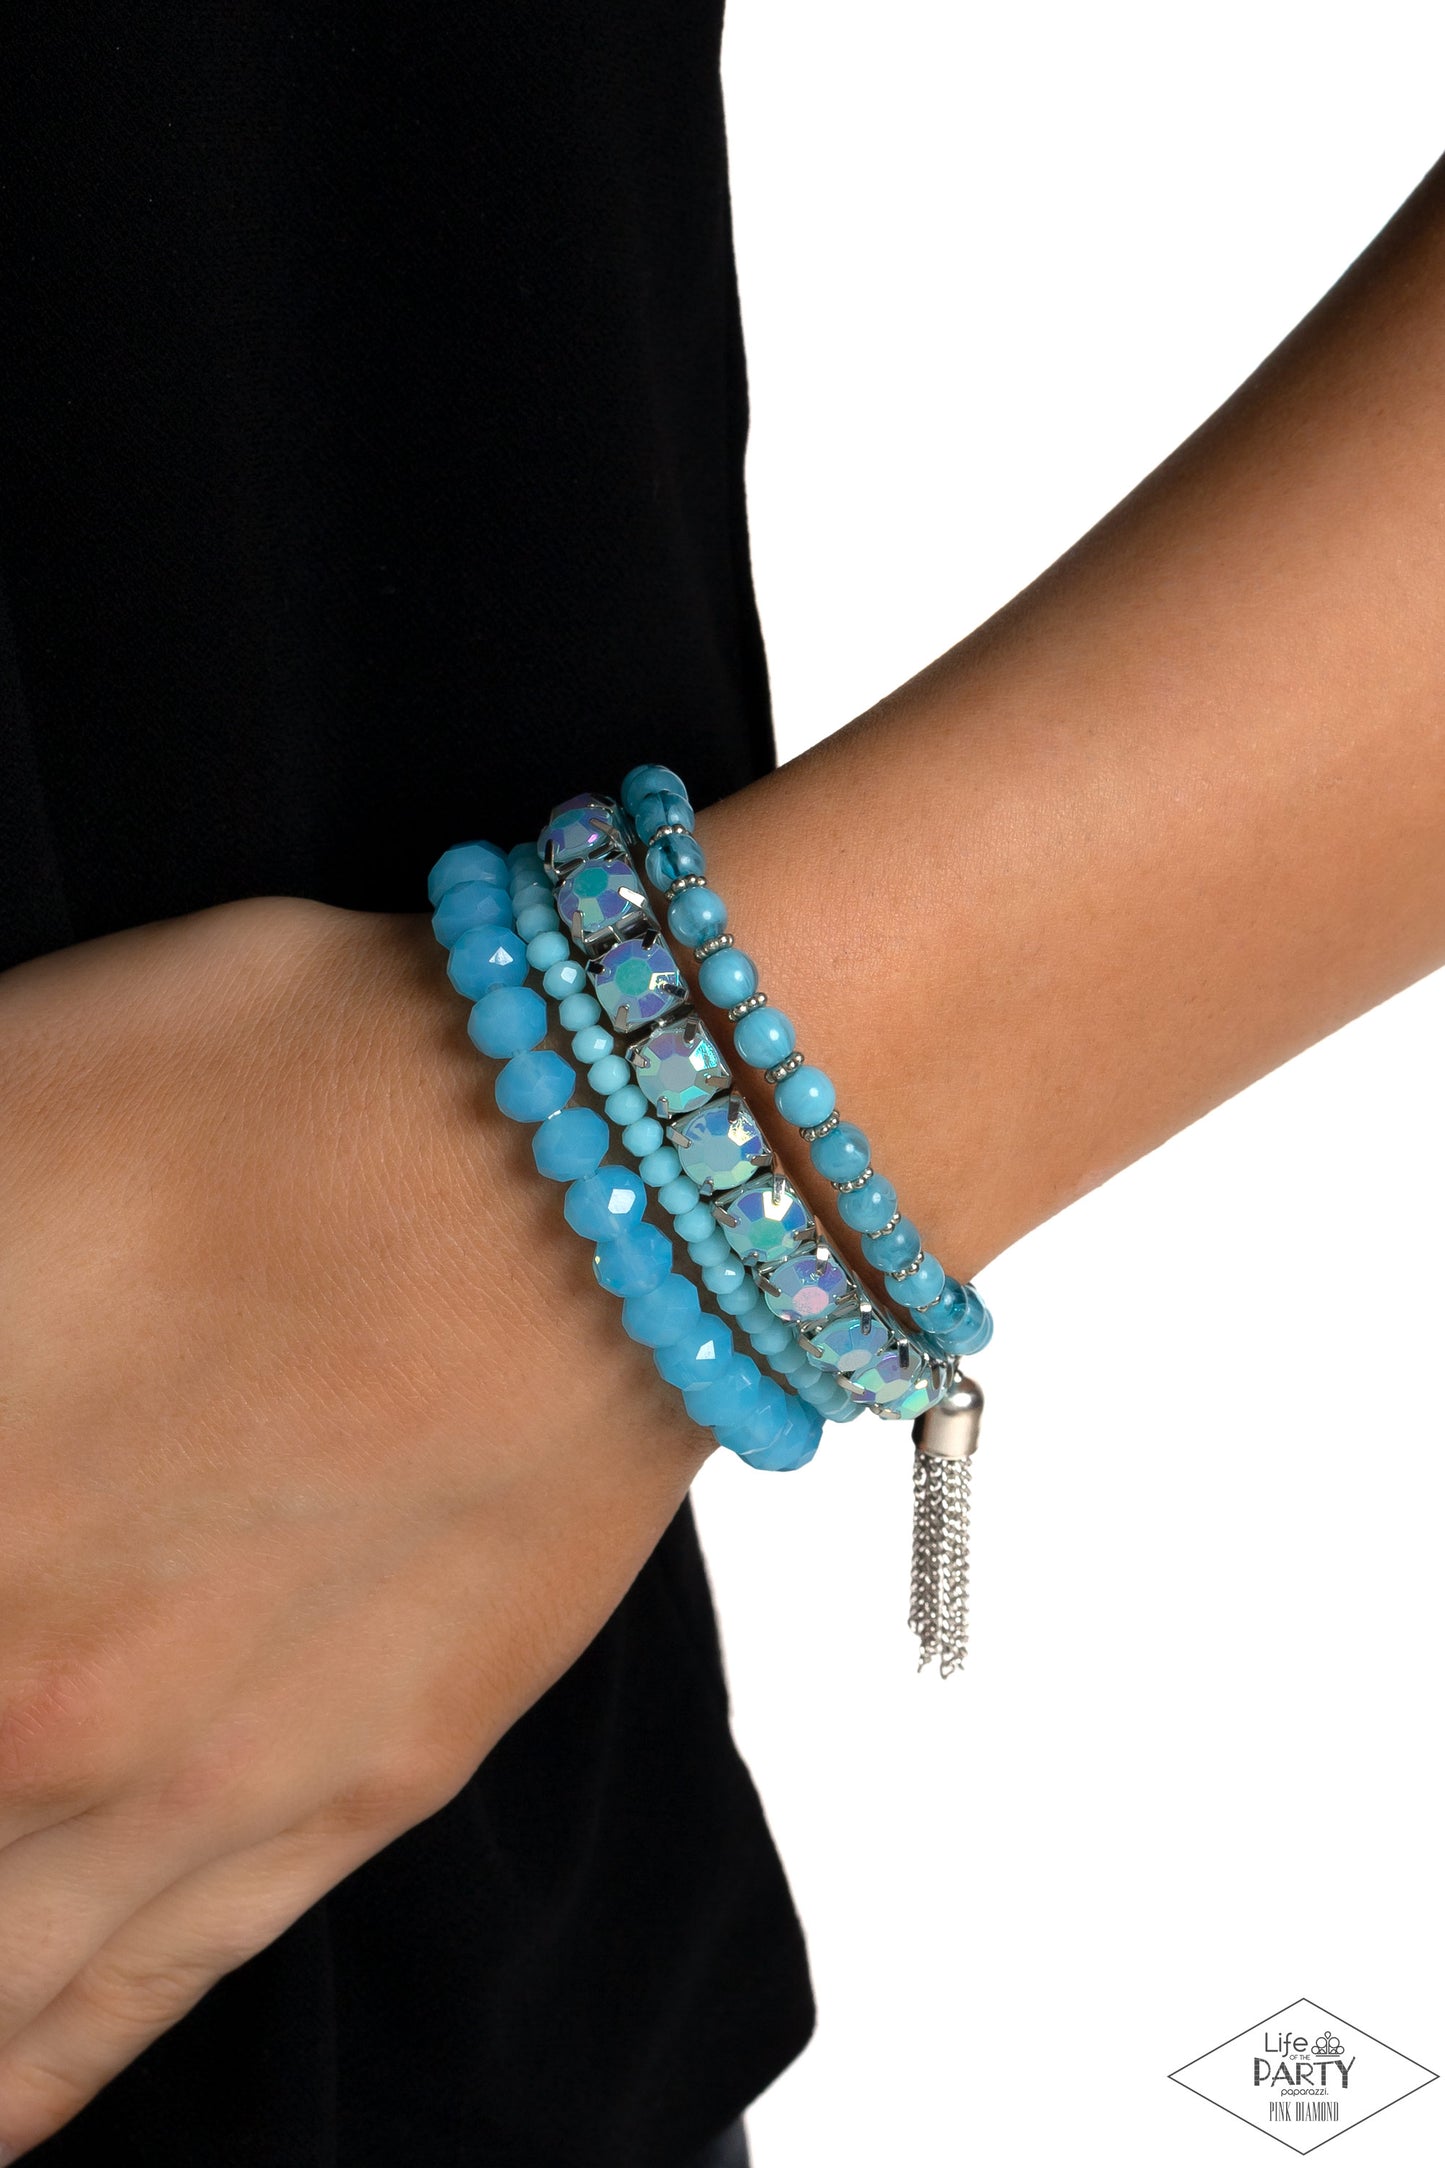 Day Trip Trinket Blue Stretch Bracelet - Paparazzi Accessories  Pinched in silver fittings, a band of UV shimmery Waterspout beads joins mismatched strands of smoky, glassy, and faceted blue beads creating four stretchy bracelets around the wrist. A single silver chain tassel dances from the crystalline compilation for a final flirty finesse.  Sold as one set of four bracelets.  P9WH-BLXX-283XX